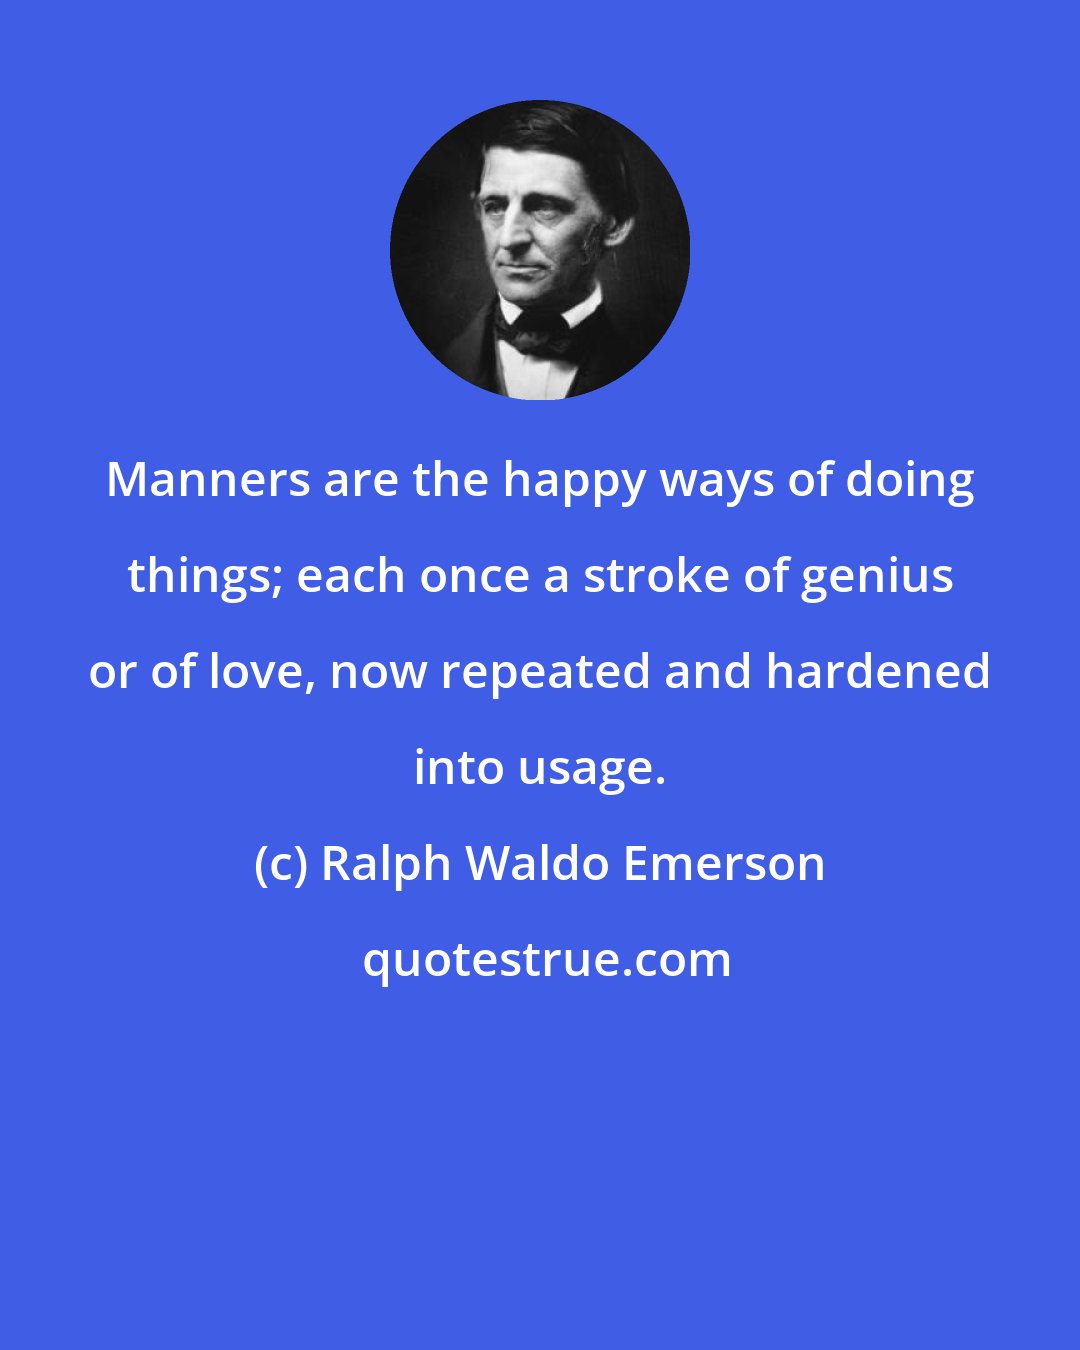 Ralph Waldo Emerson: Manners are the happy ways of doing things; each once a stroke of genius or of love, now repeated and hardened into usage.